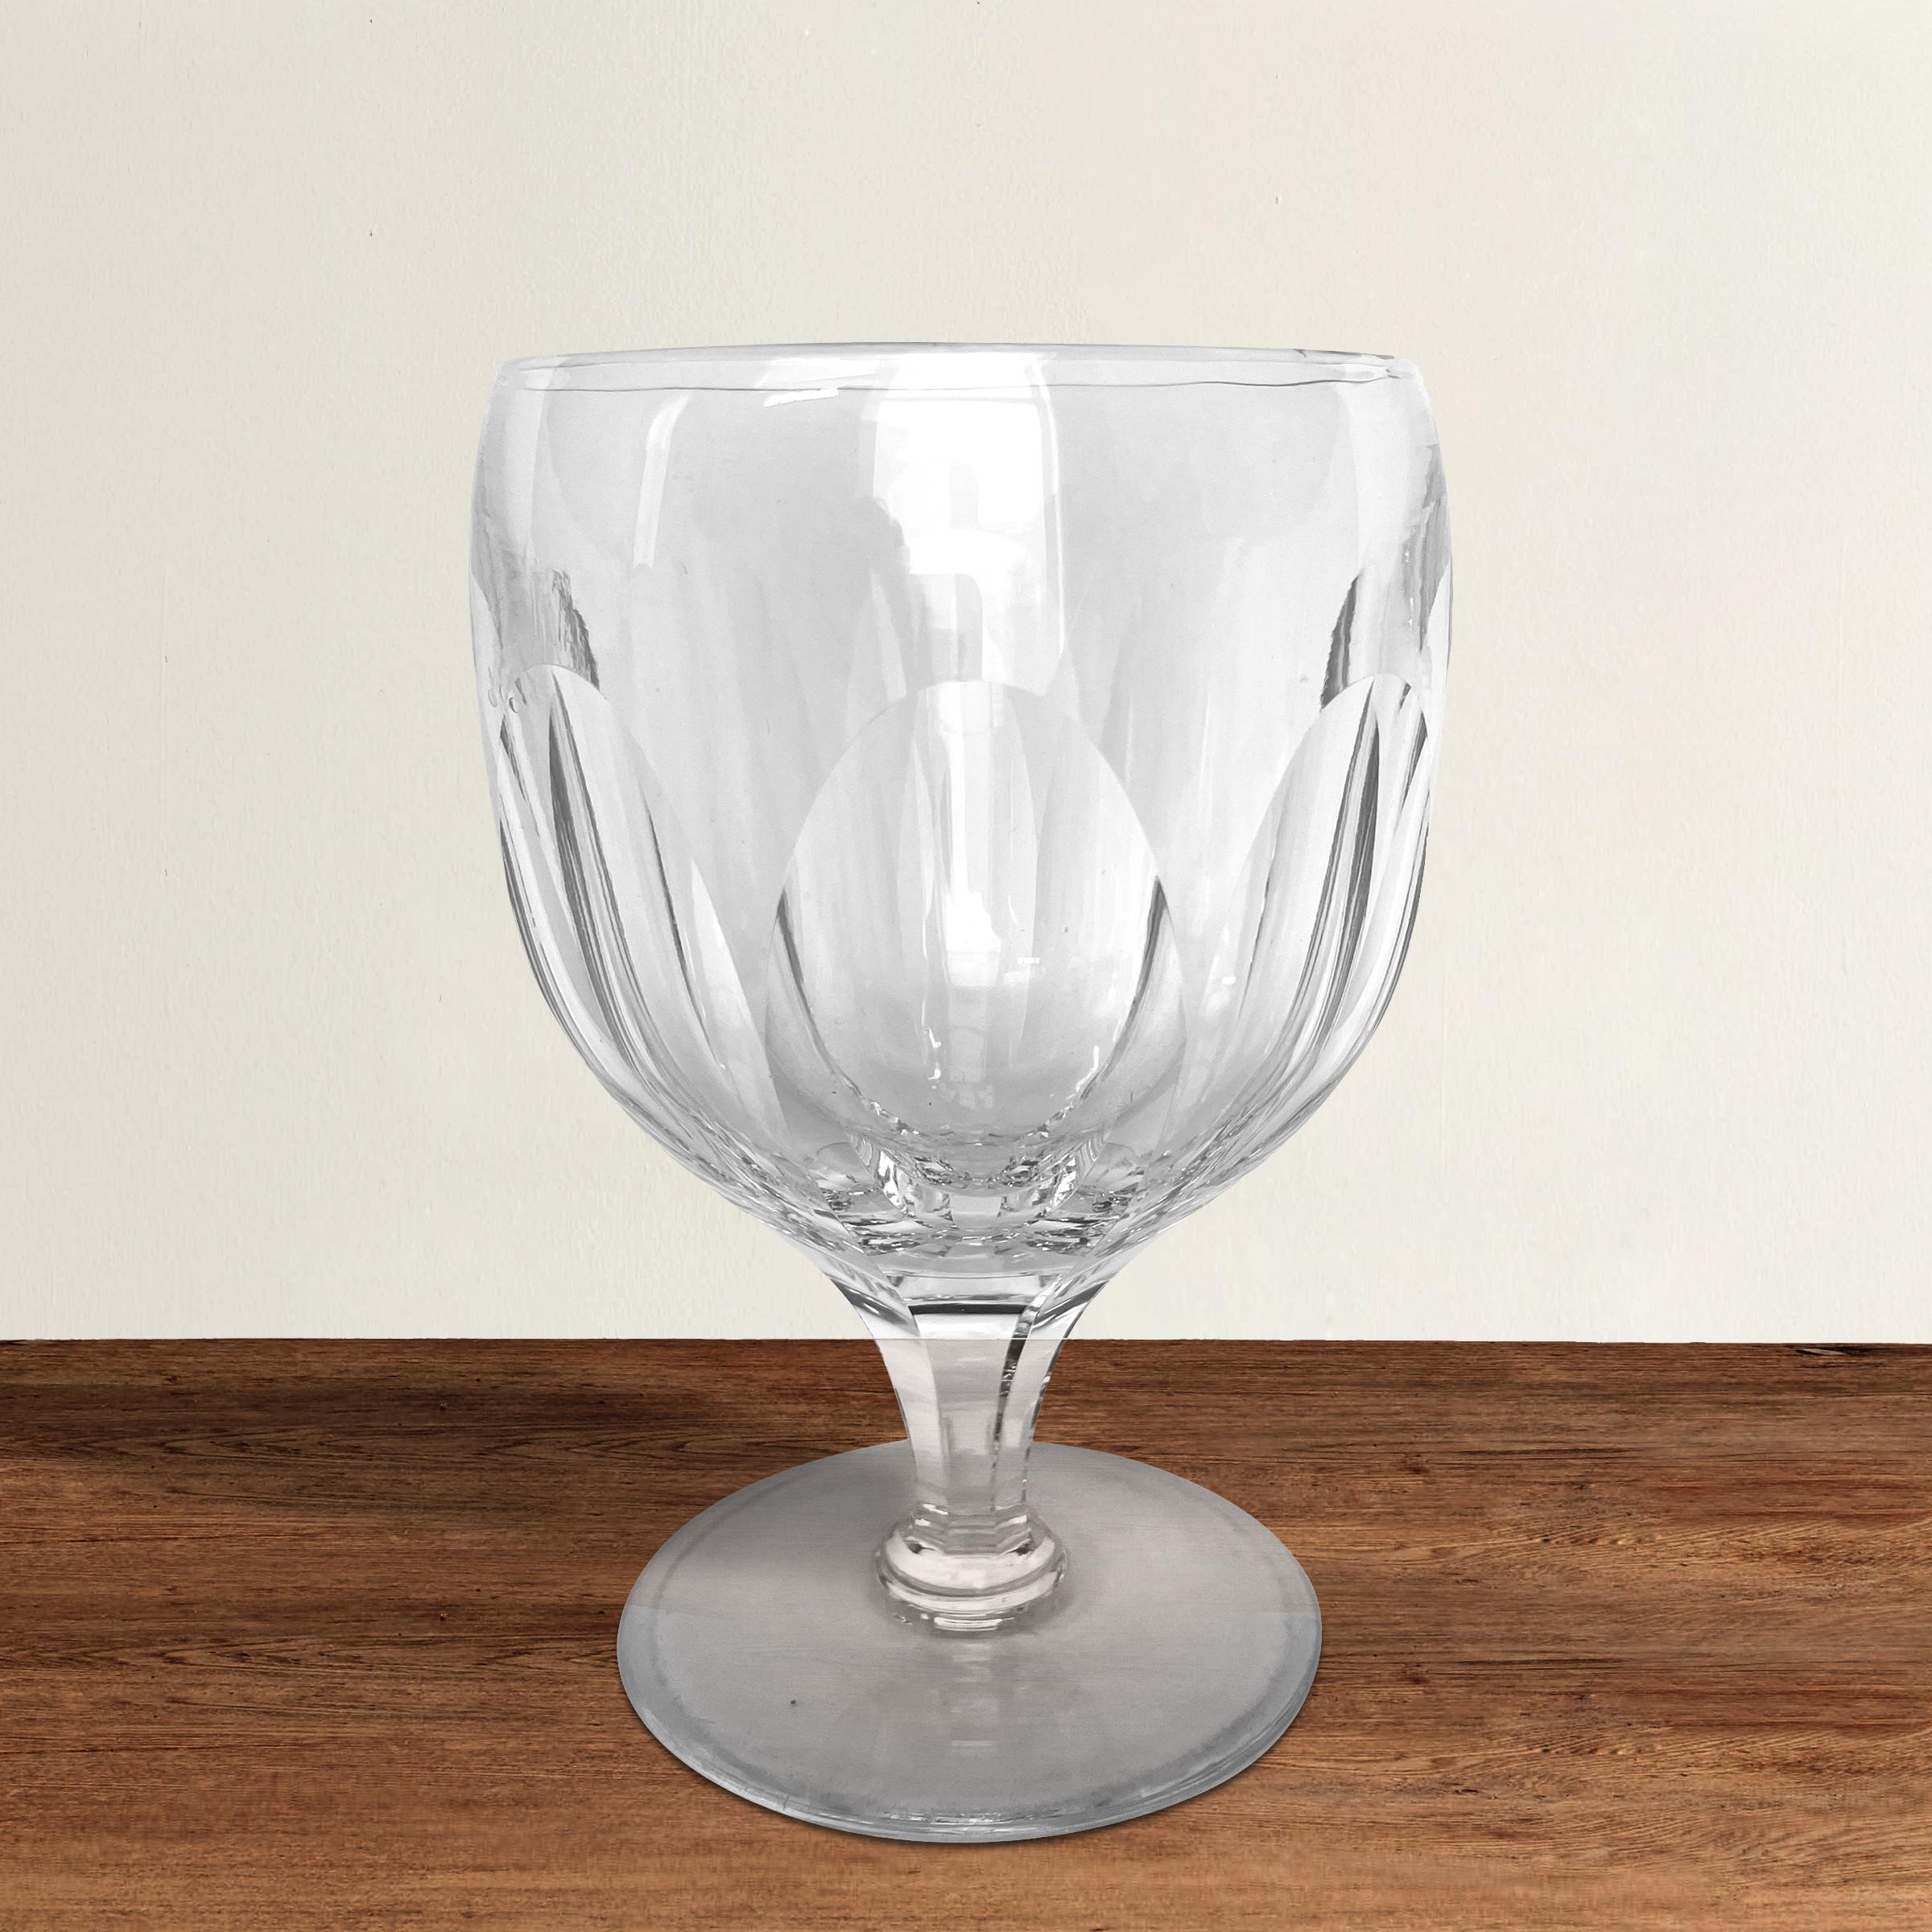 A striking set of eight English Webb 'Royal Yacht' crystal wine goblets. The Royal Yacht pattern was created in honor of the launch of HMY Britannia in 1954. The glasses were designed with a low, wide bowl, a wide foot, and quite a bit of heft to